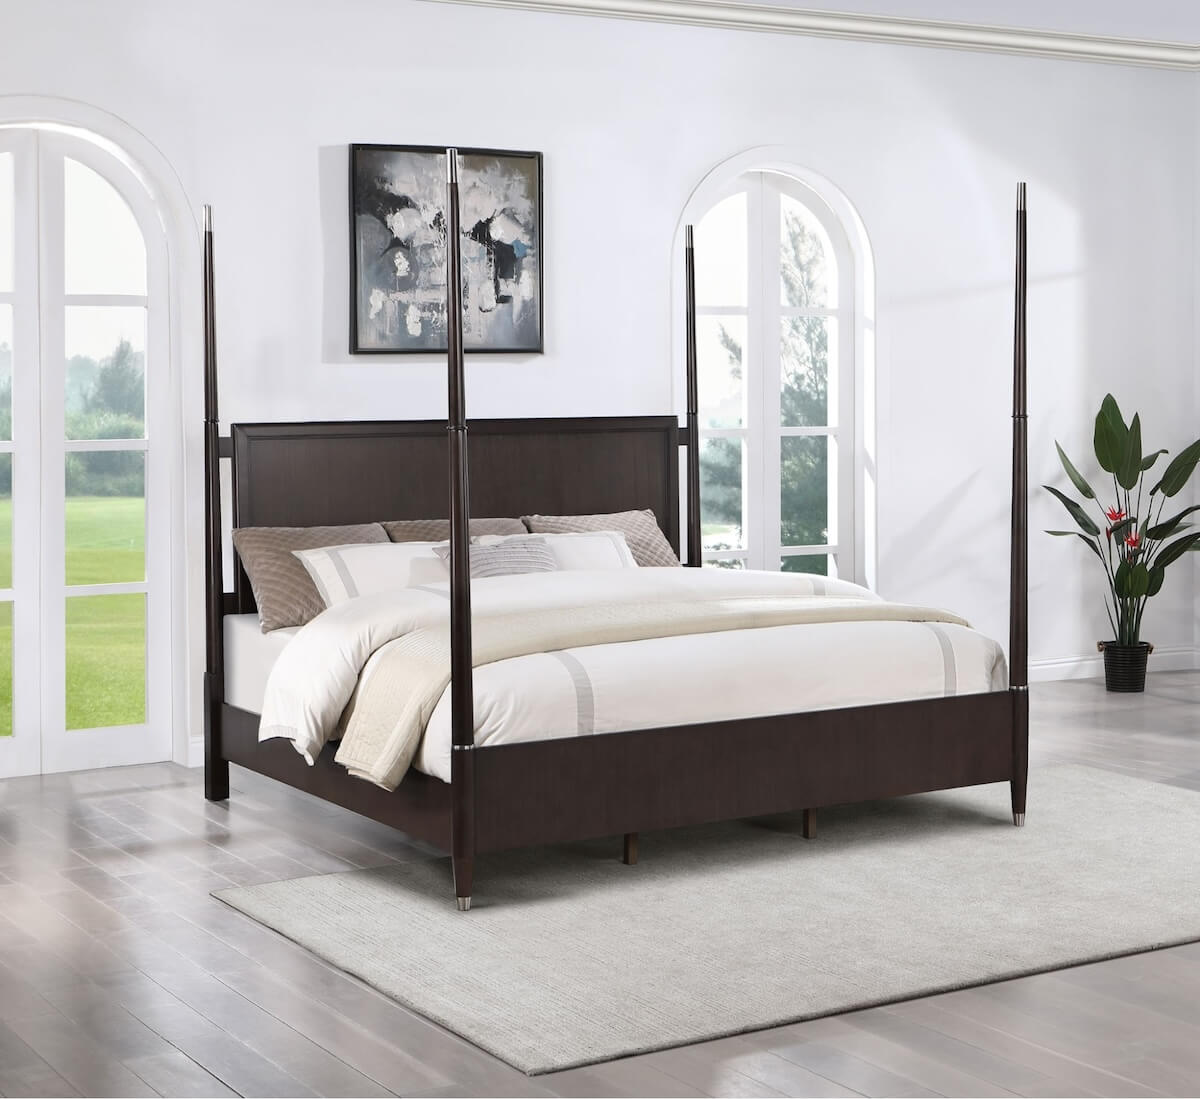 Traditional interior design: Emberlyn Queen Poster Bed Brown